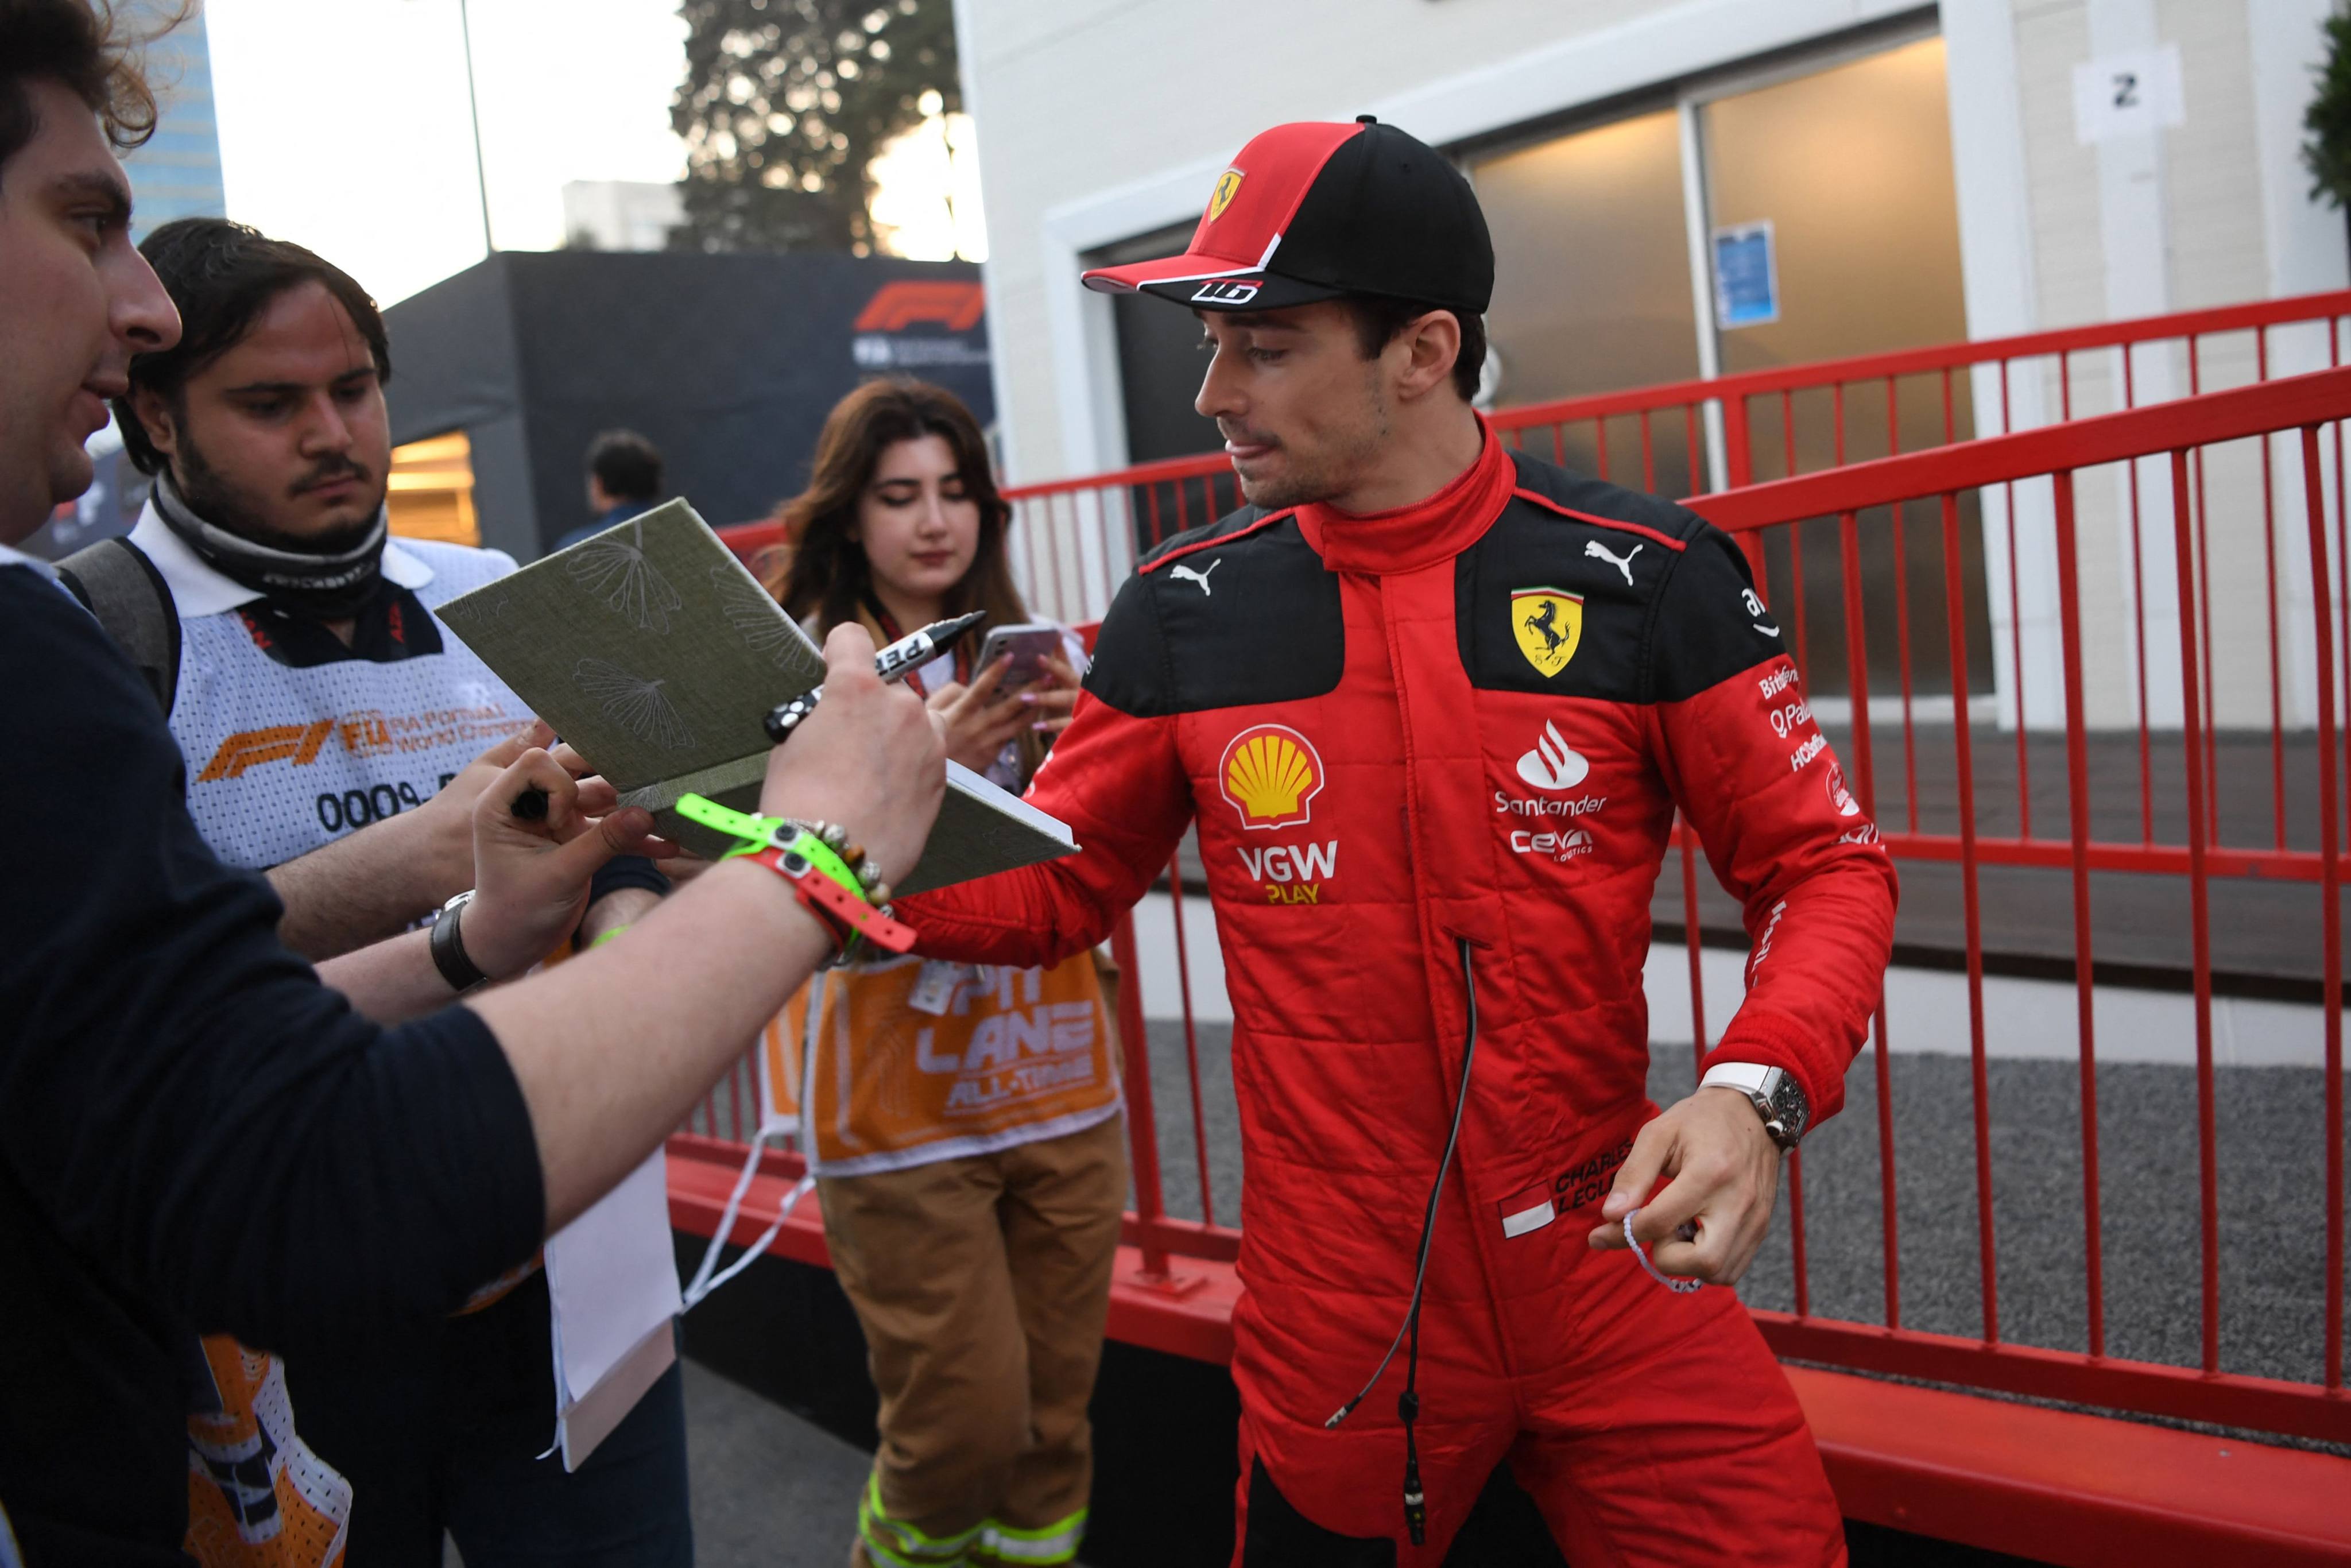 Ferrari’s Charles Leclerc signs autographs for fans after qualifying at the Formula One Azerbaijan Grand Prix at the Baku City Circuit. Photo: AFP